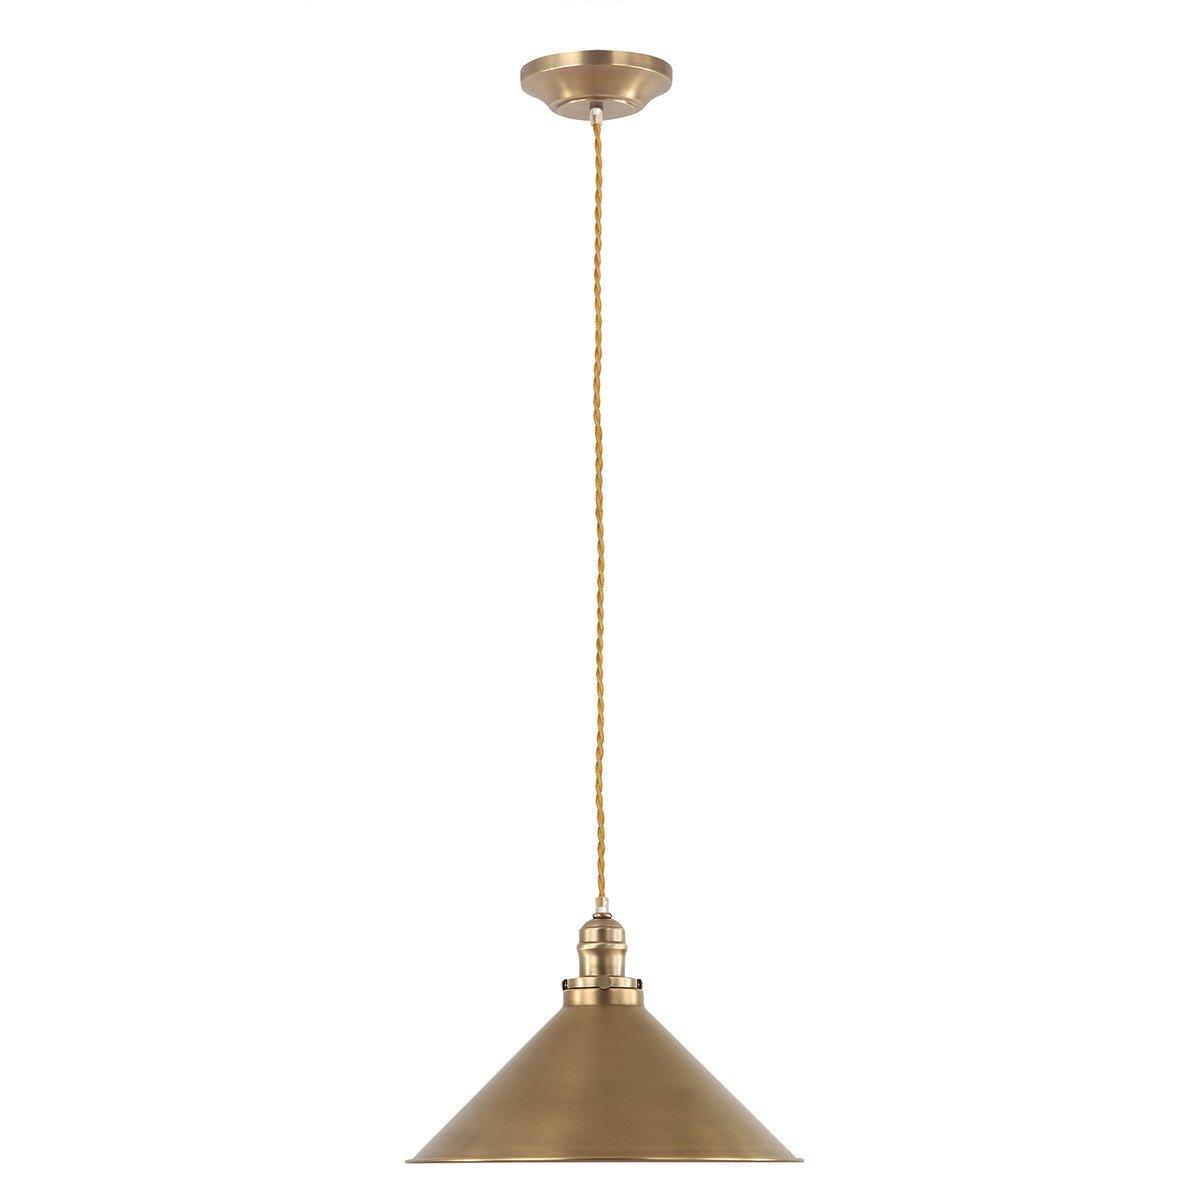 Provence 1 Light Dome Ceiling Pendant Aged Brass E27